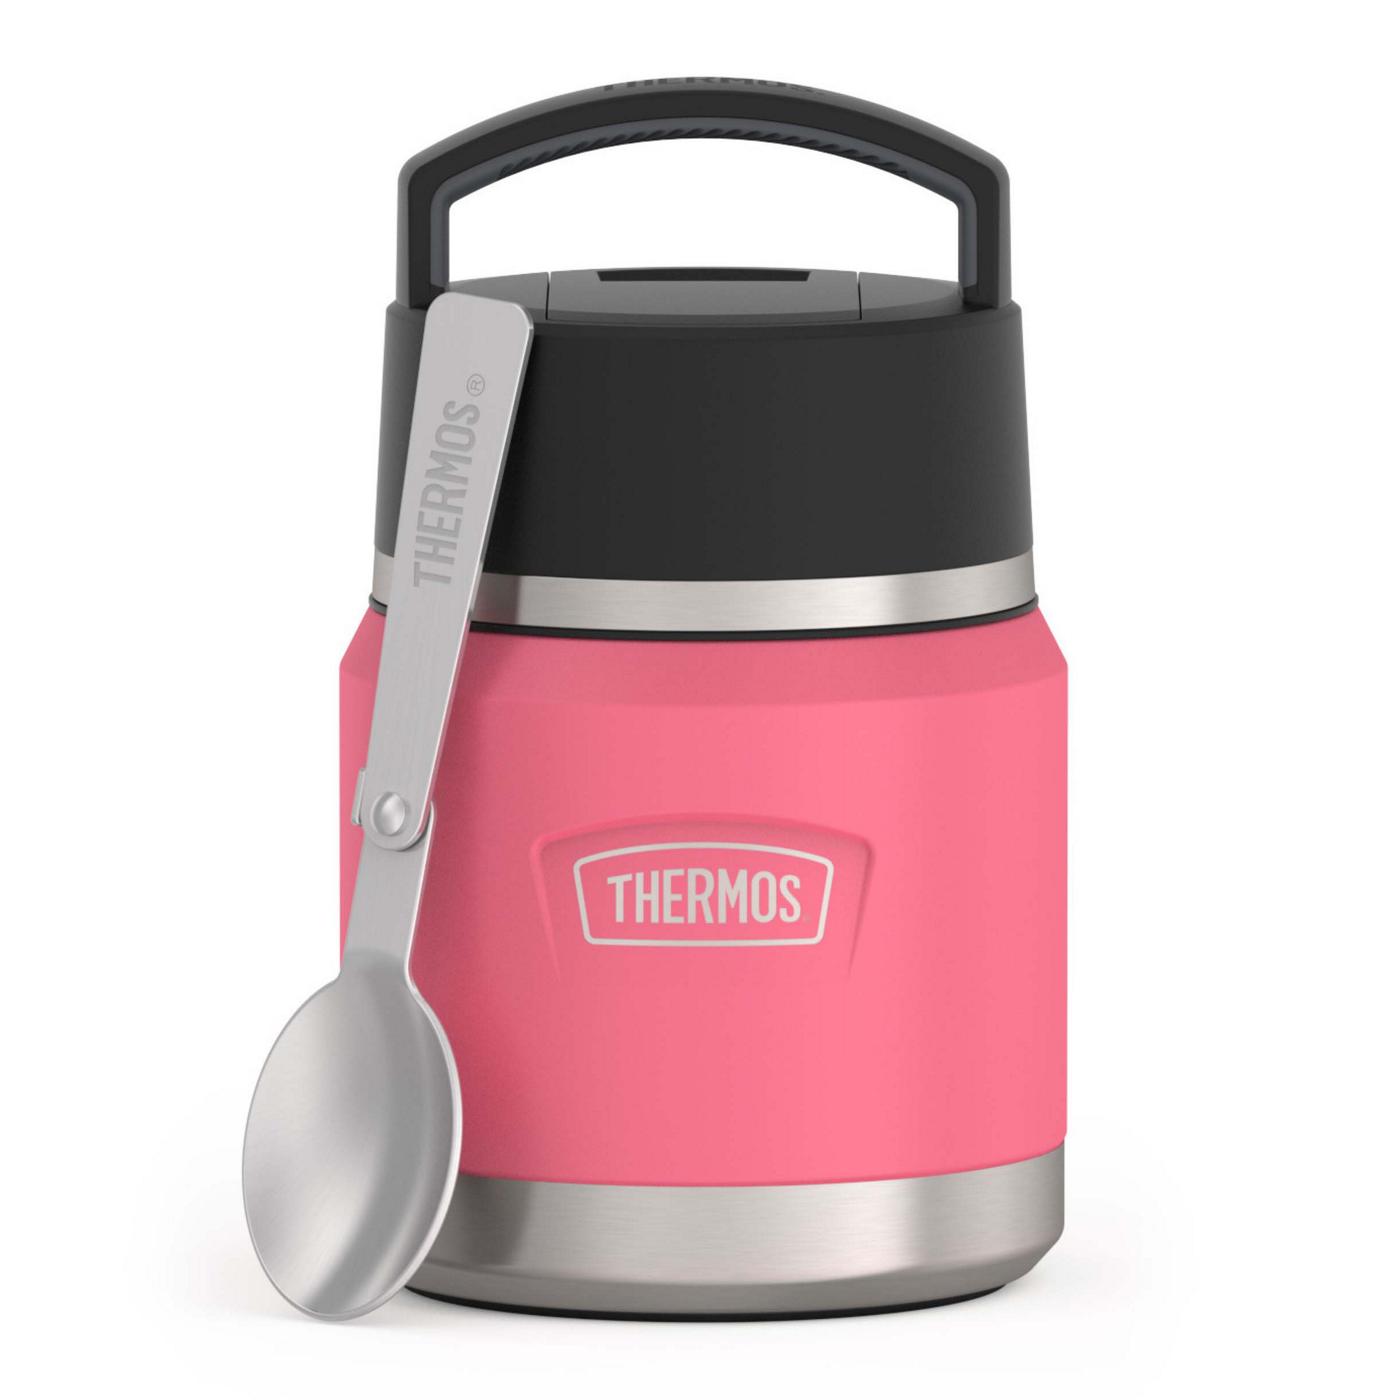 Thermos Icon Series Food Jar - Pink; image 5 of 6